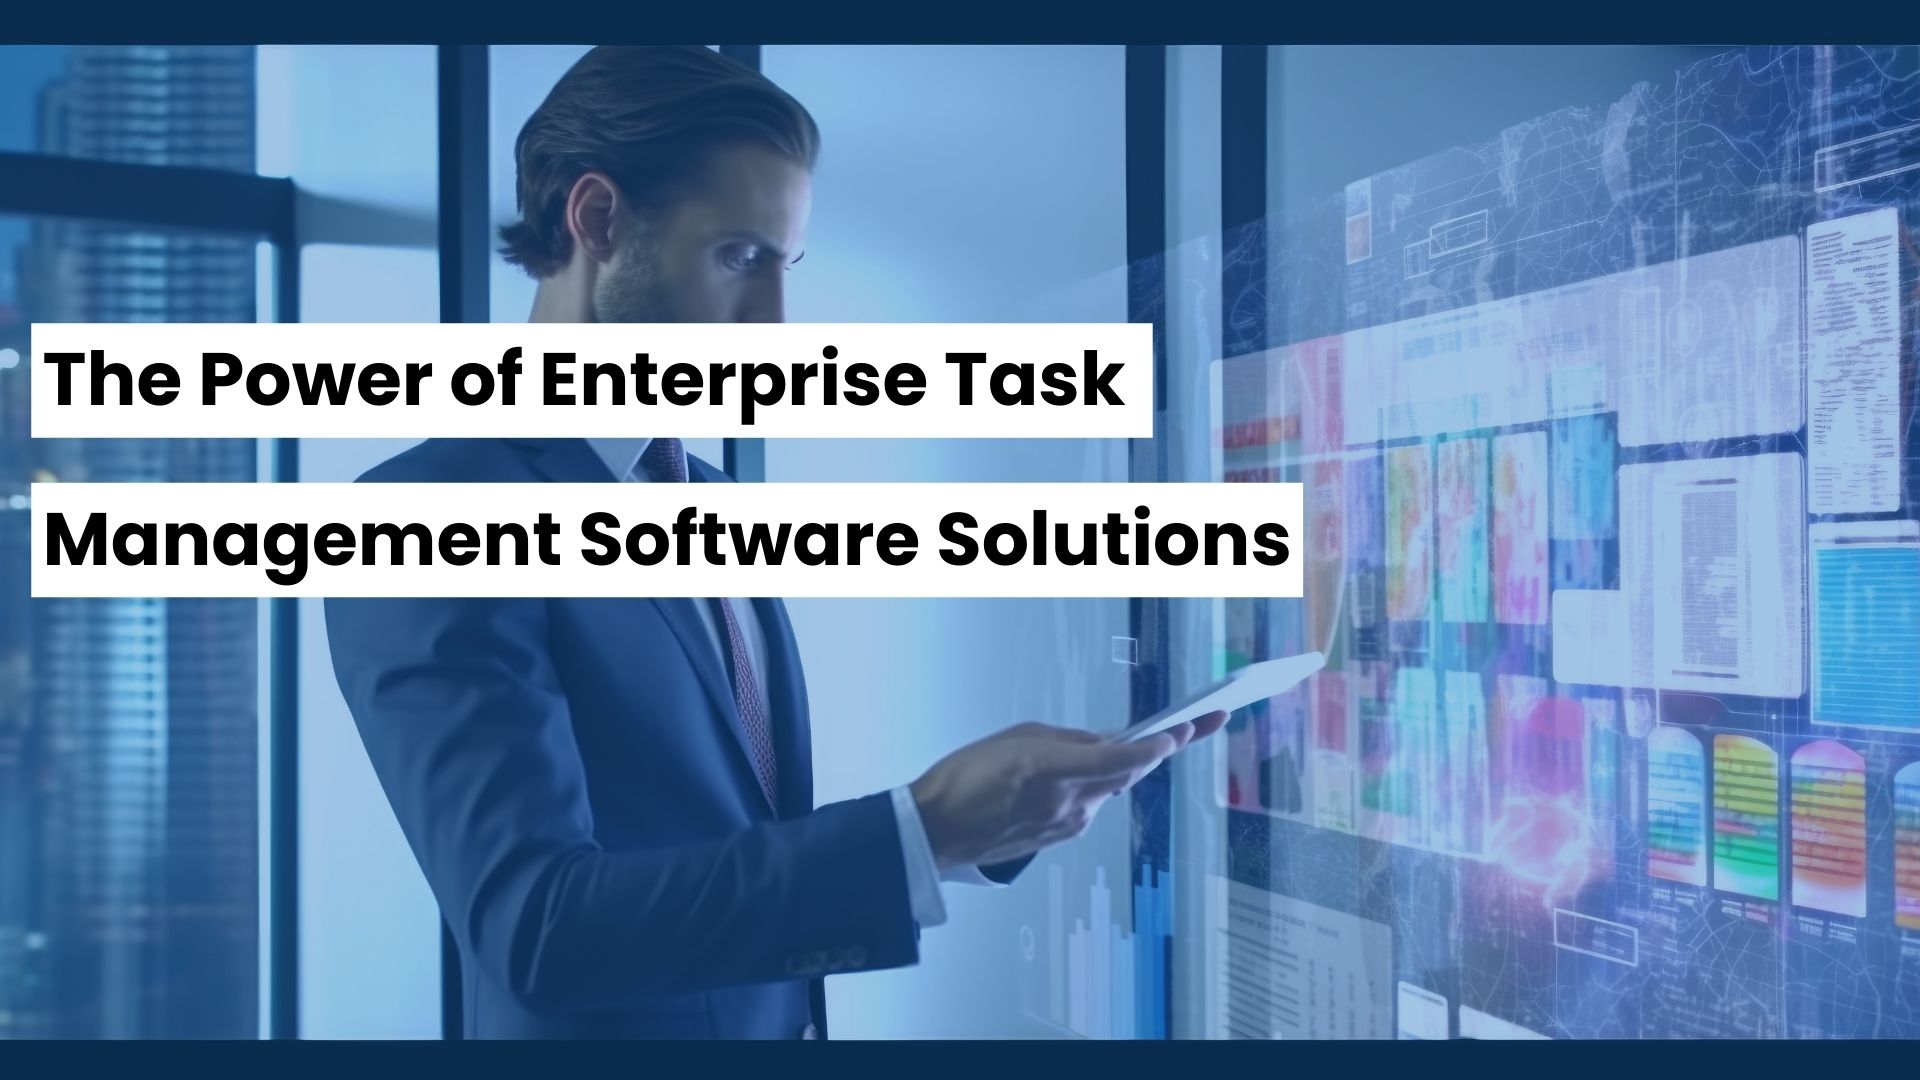 The Power of Enterprise Task Management Software Solutions